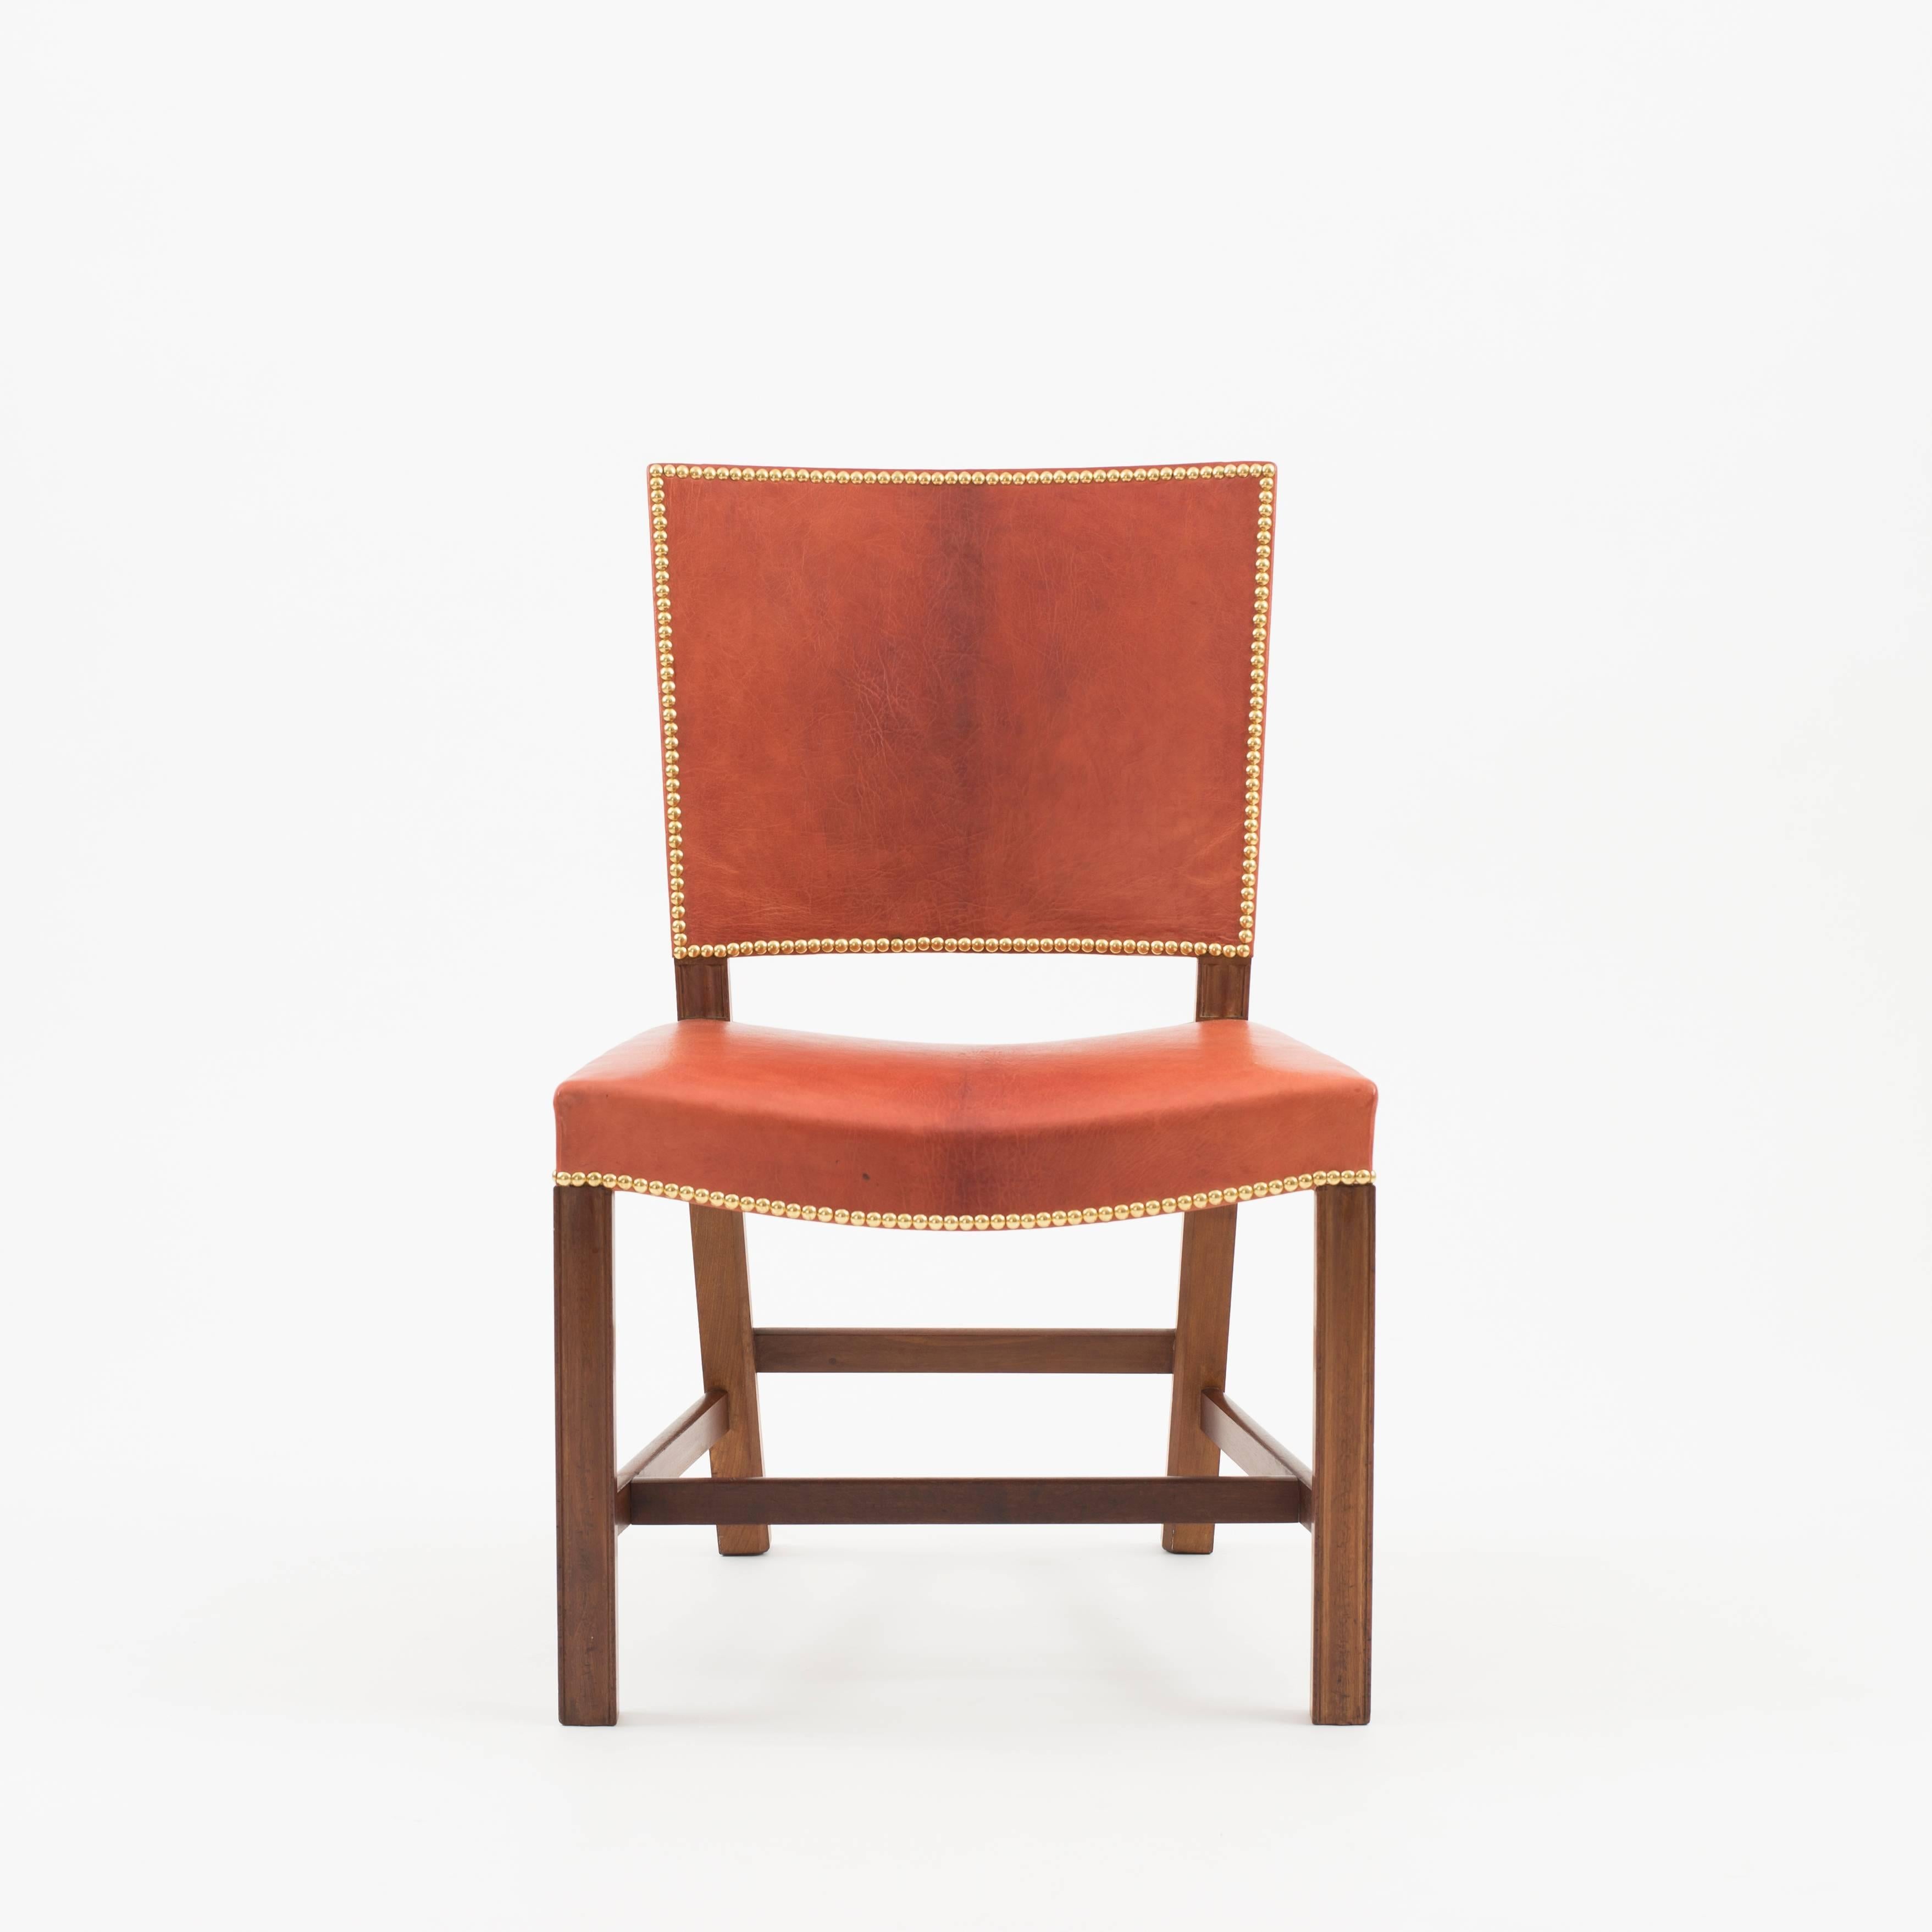 Kaare Klint 'Red Chair' in Cuban mahogany, Niger leather and brass nails. Executed by Rud. Rasmussen 1936-1940.

Underside with manufacturer's paper label RUD. RASMUSSENS/SNEDKERIER/45 NØRREBROGAD/KØBENHAVN, pencilled number and architect's